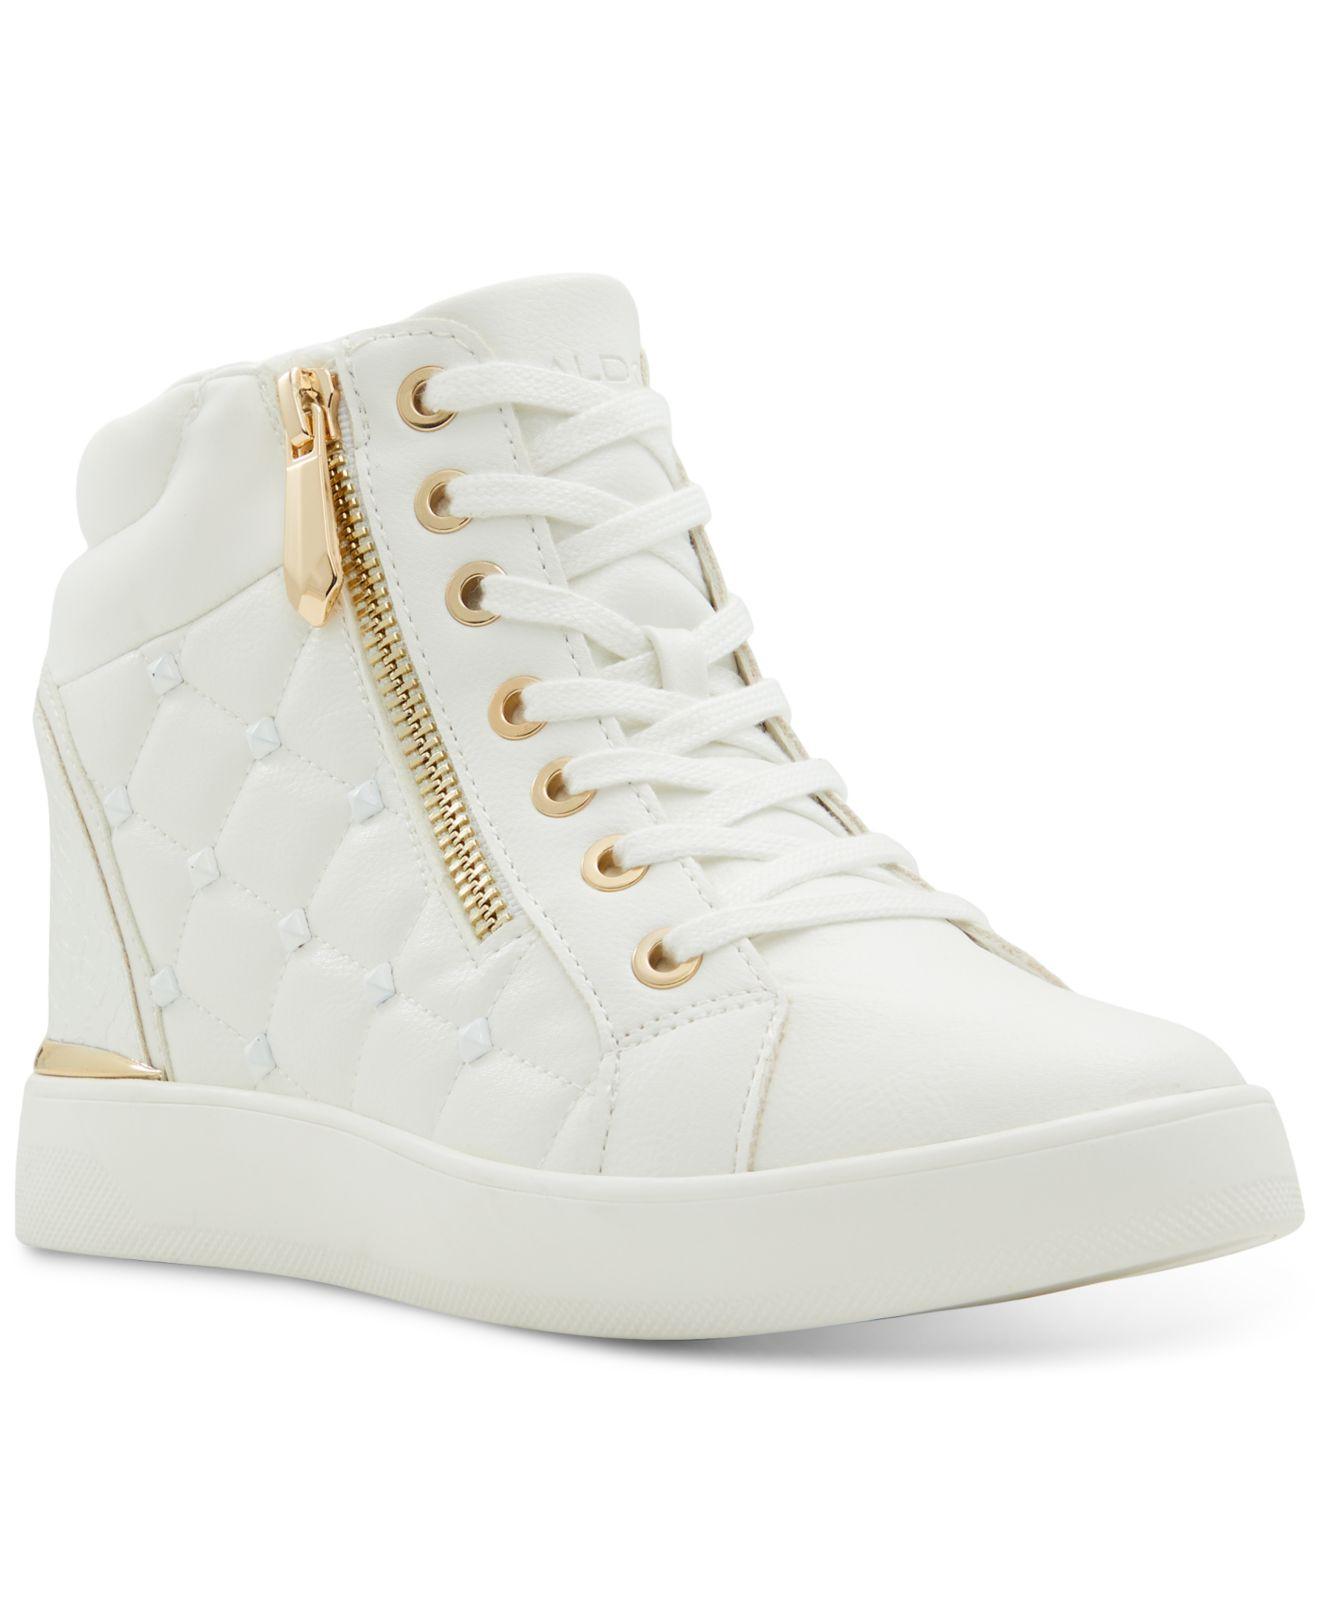 ALDO Ailannah Lace-up Wedge Sneakers in White | Lyst